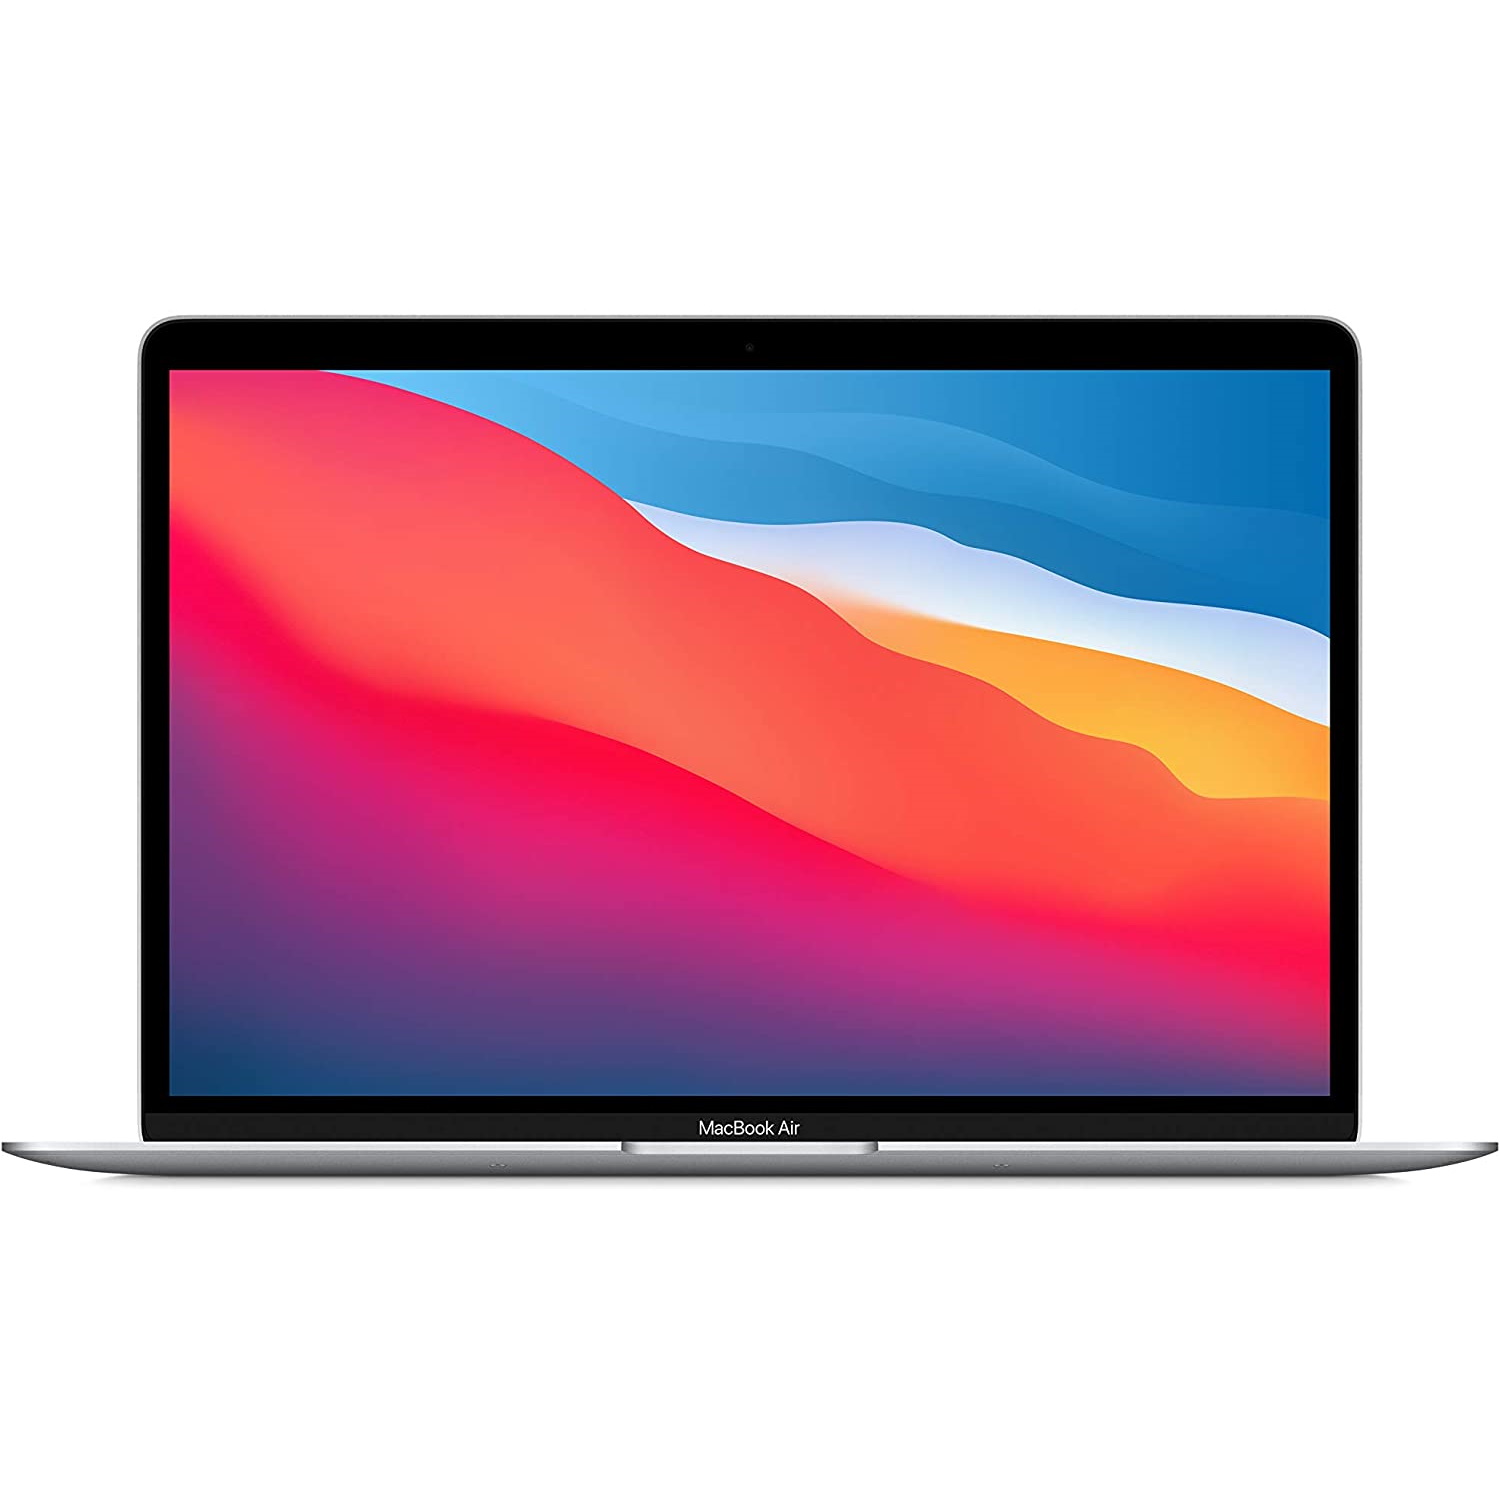 Save $150 on the MacBook Air with this deal exclusive to Amazon